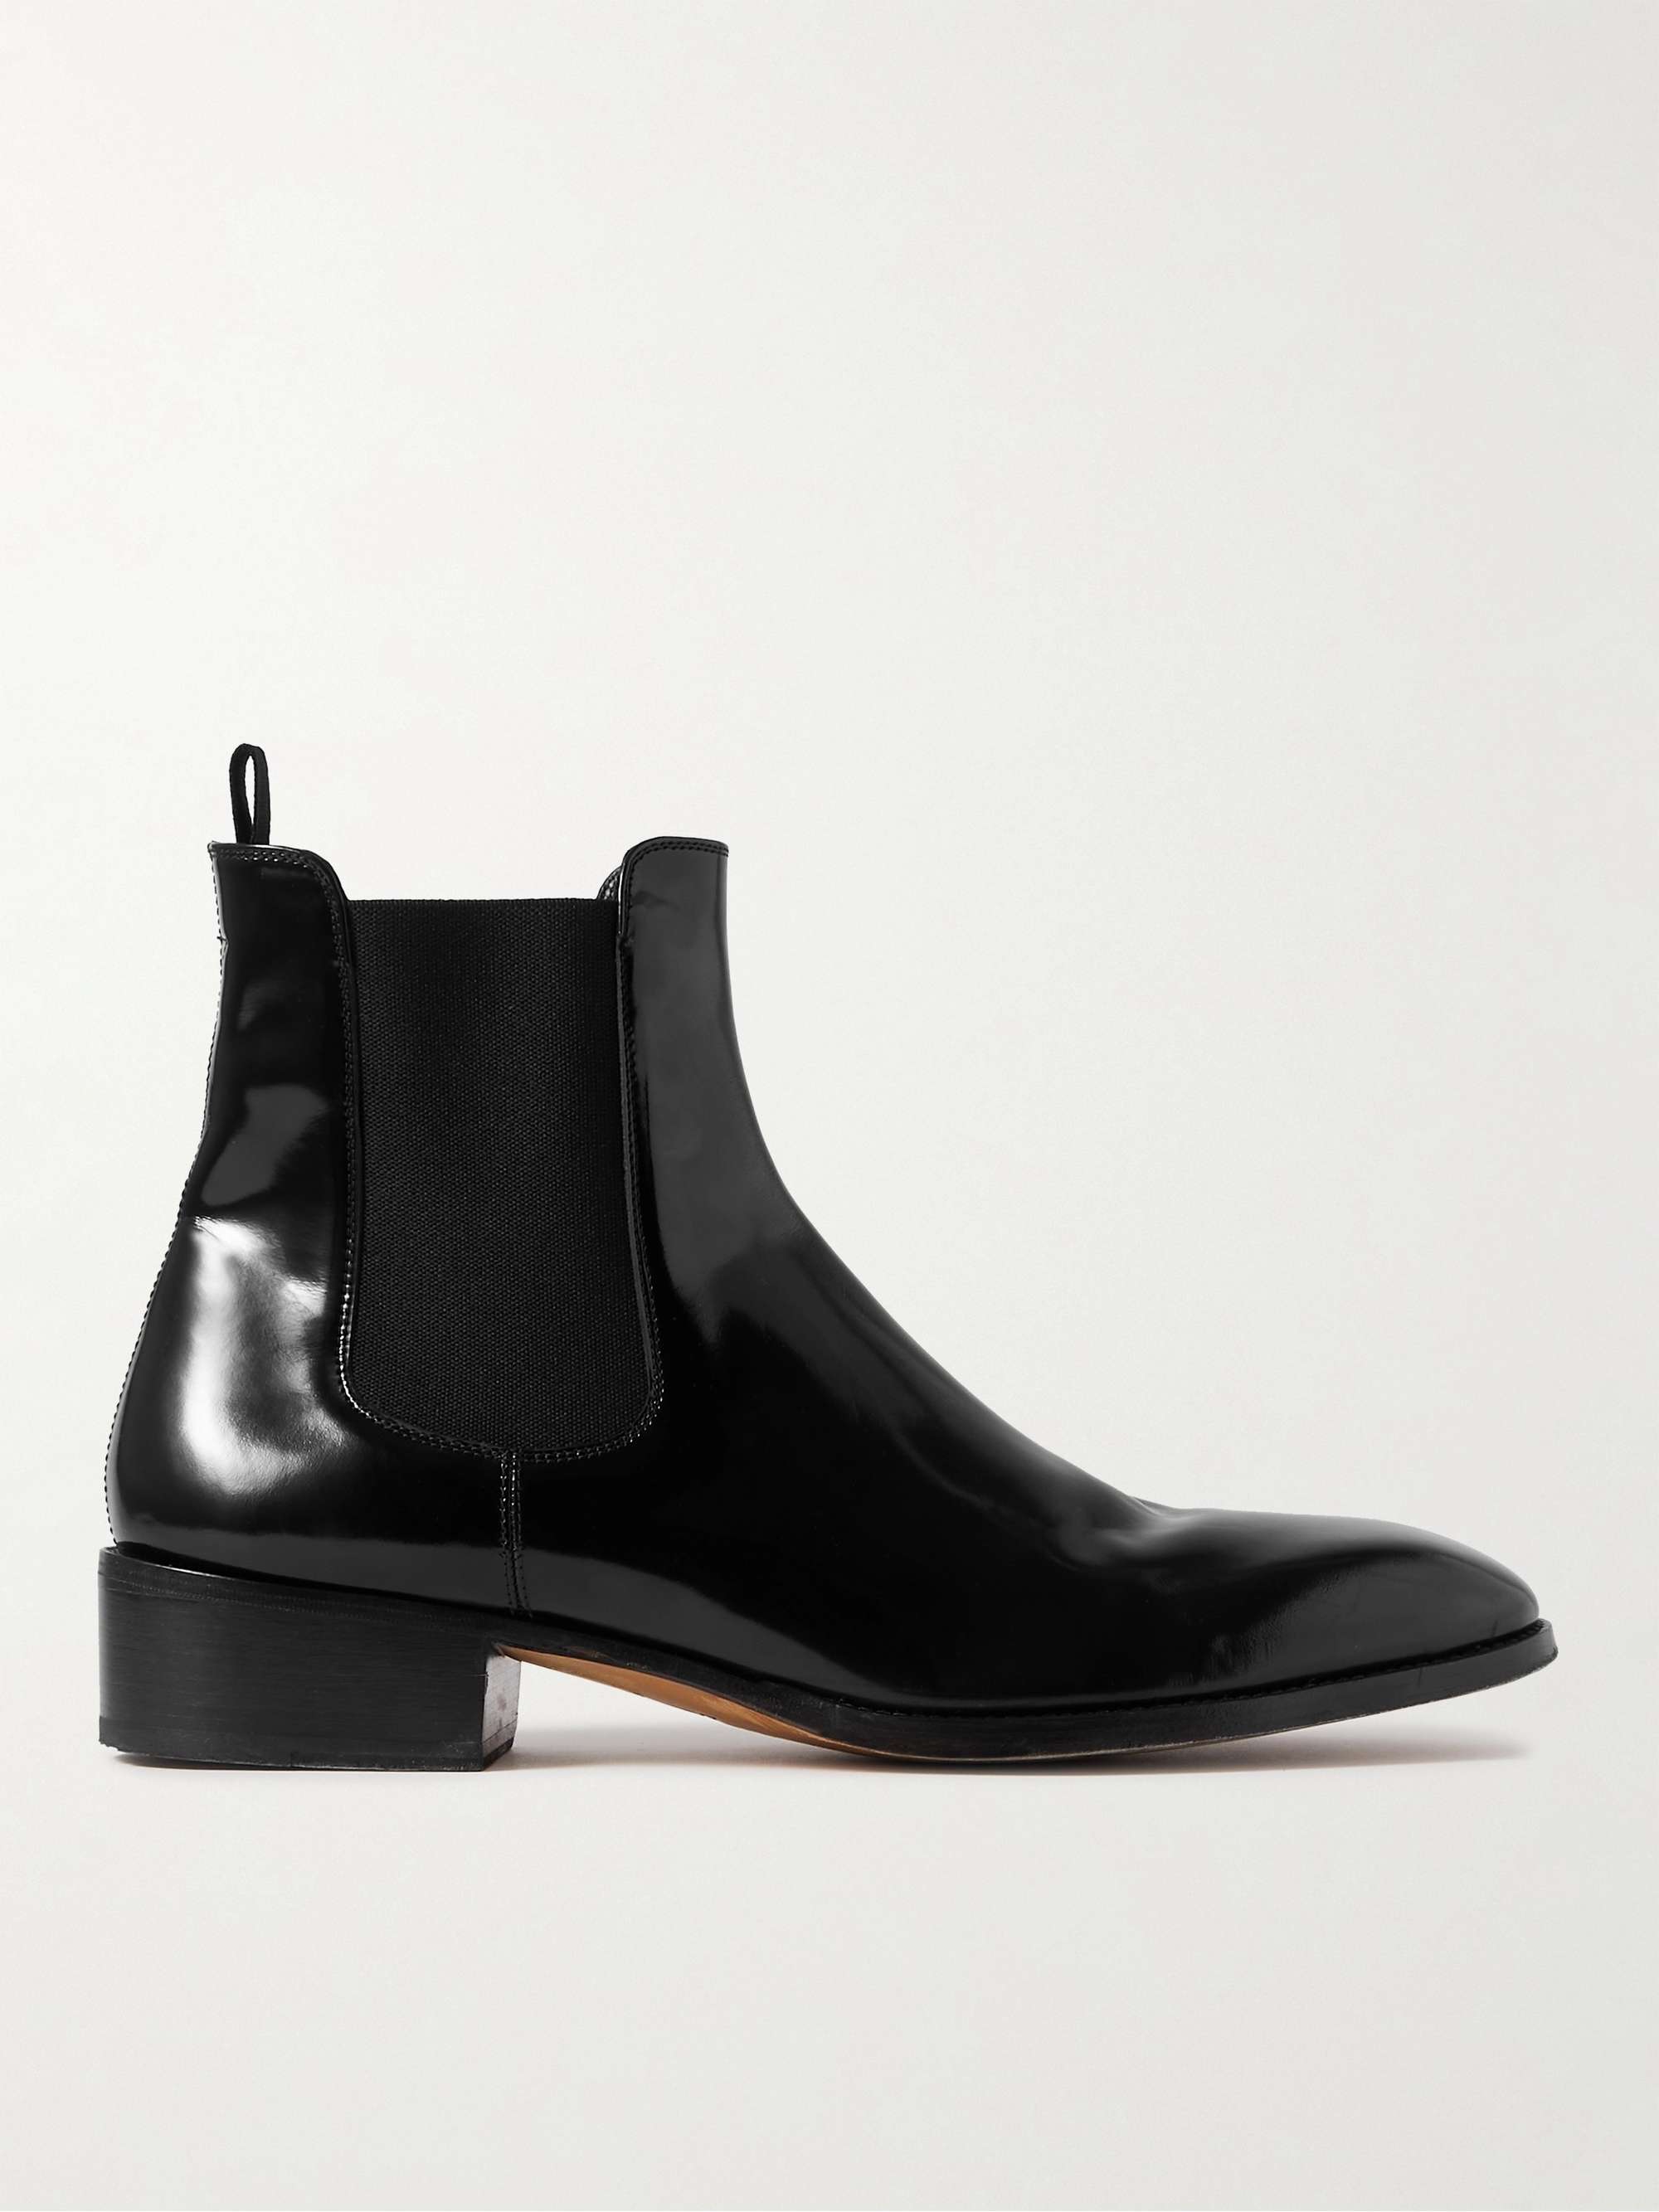 TOM FORD Alec Patent-Leather Chelsea Boots for Men | MR PORTER